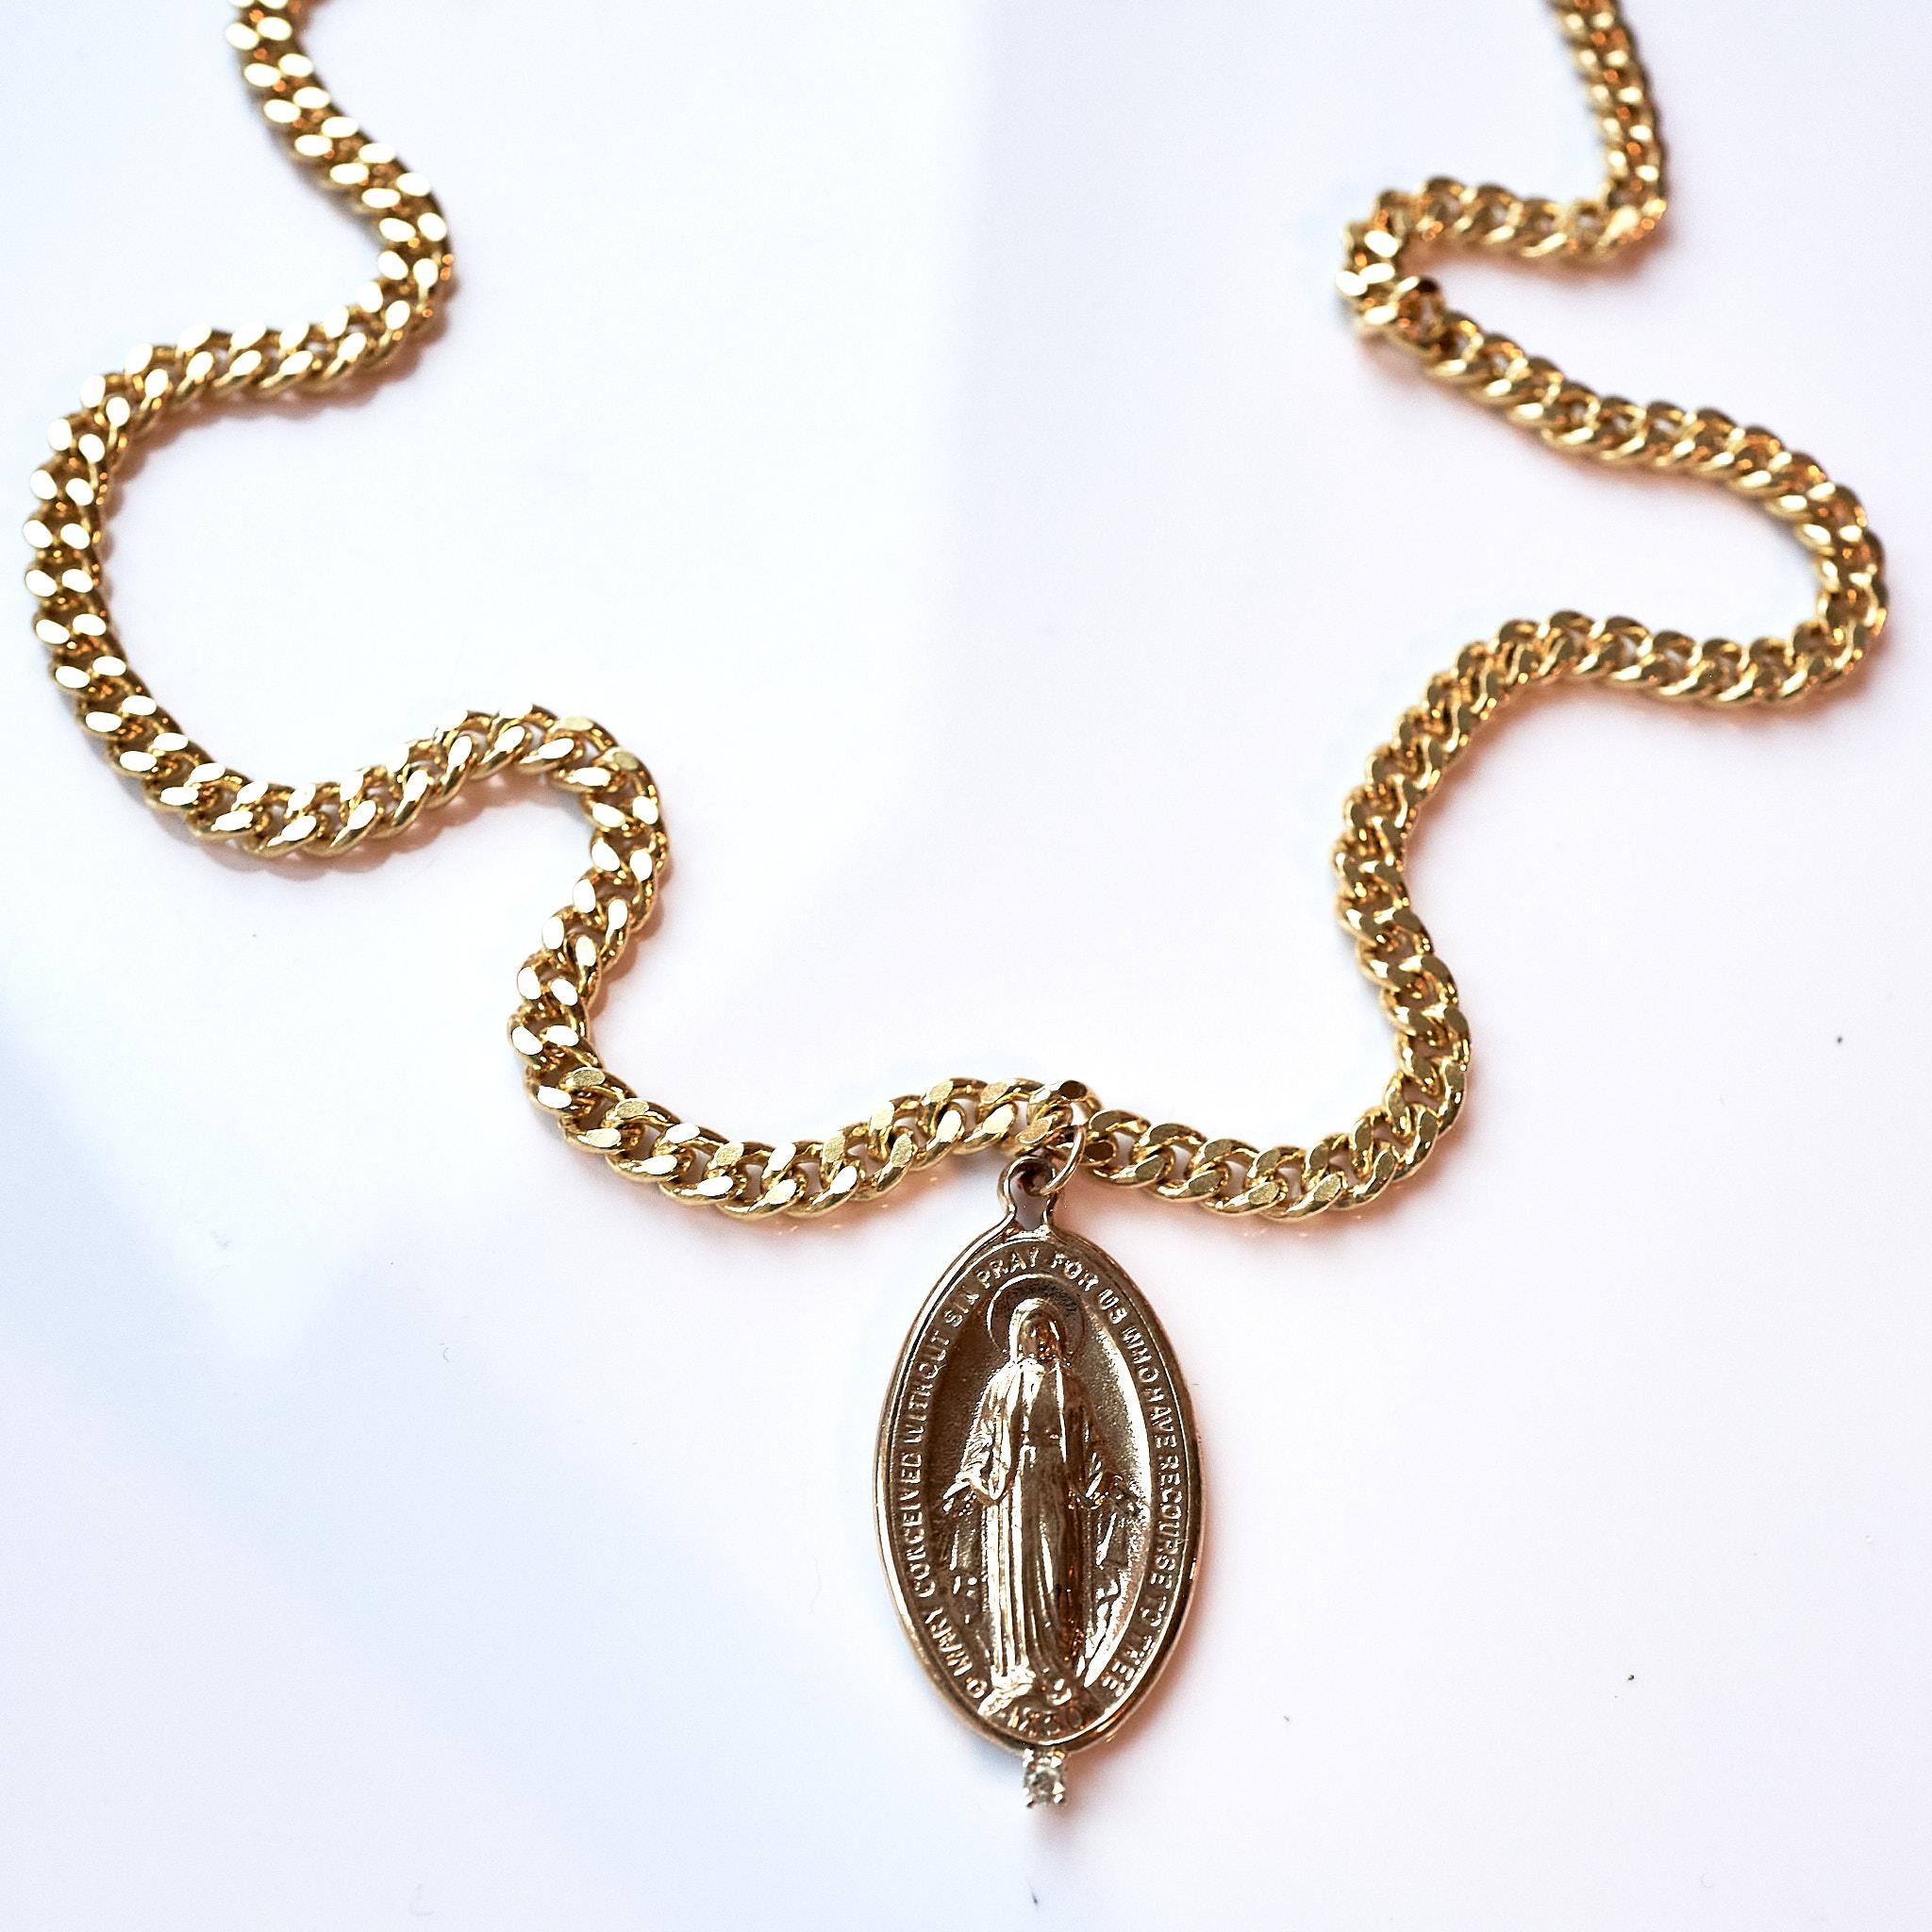 White Diamond Medal Virgin Mary Oval Medal Chain Necklace J Dauphin For Sale 2